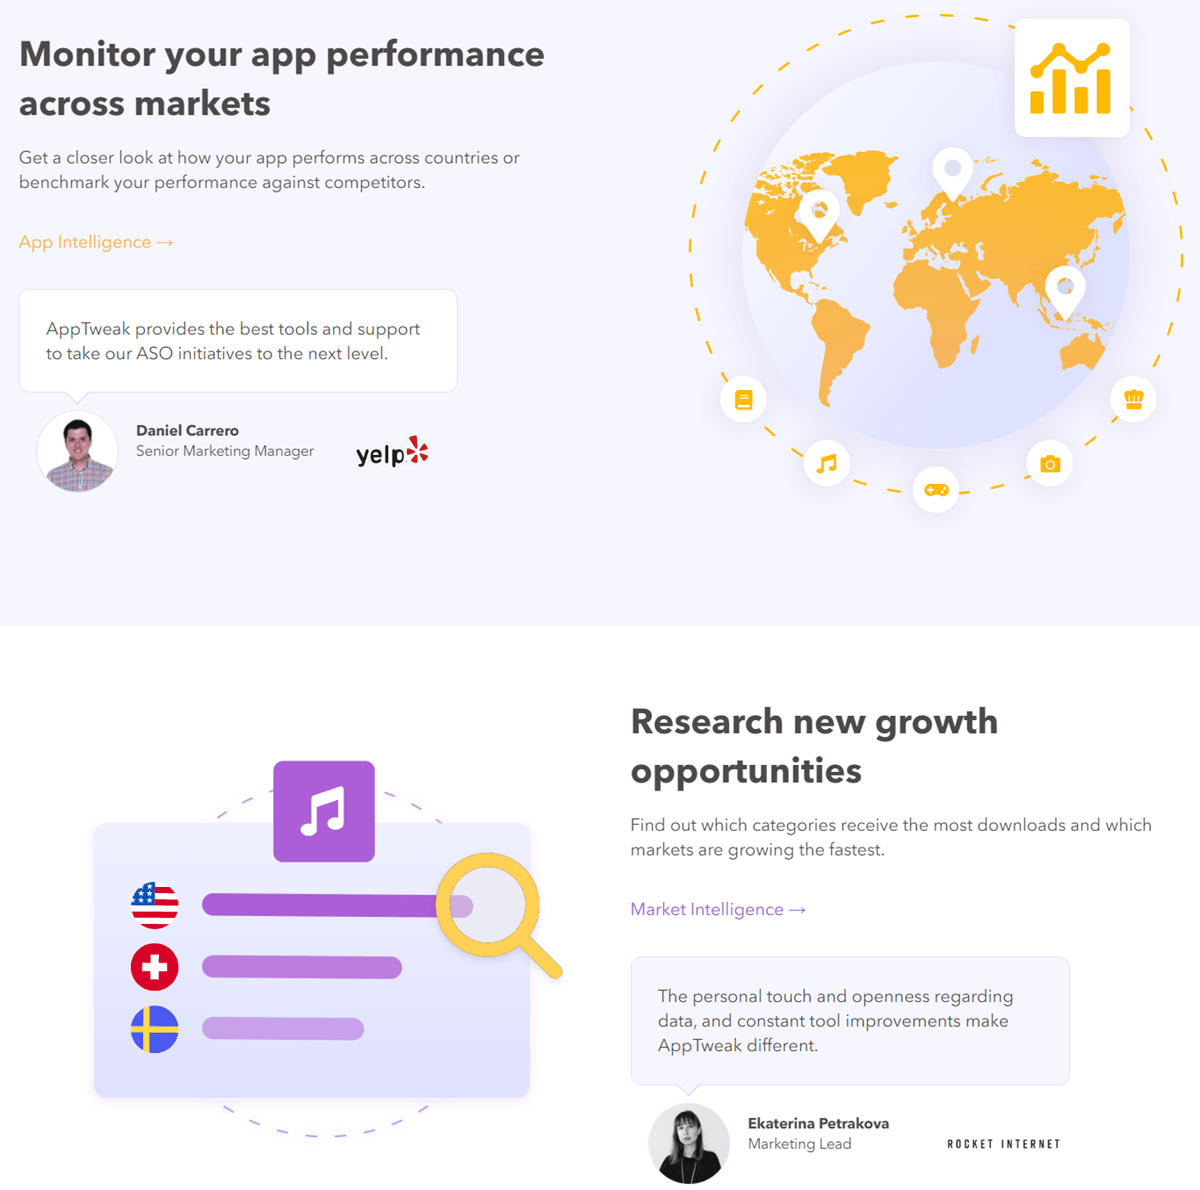 Monitor Your App Performance and Research new growth opportunities